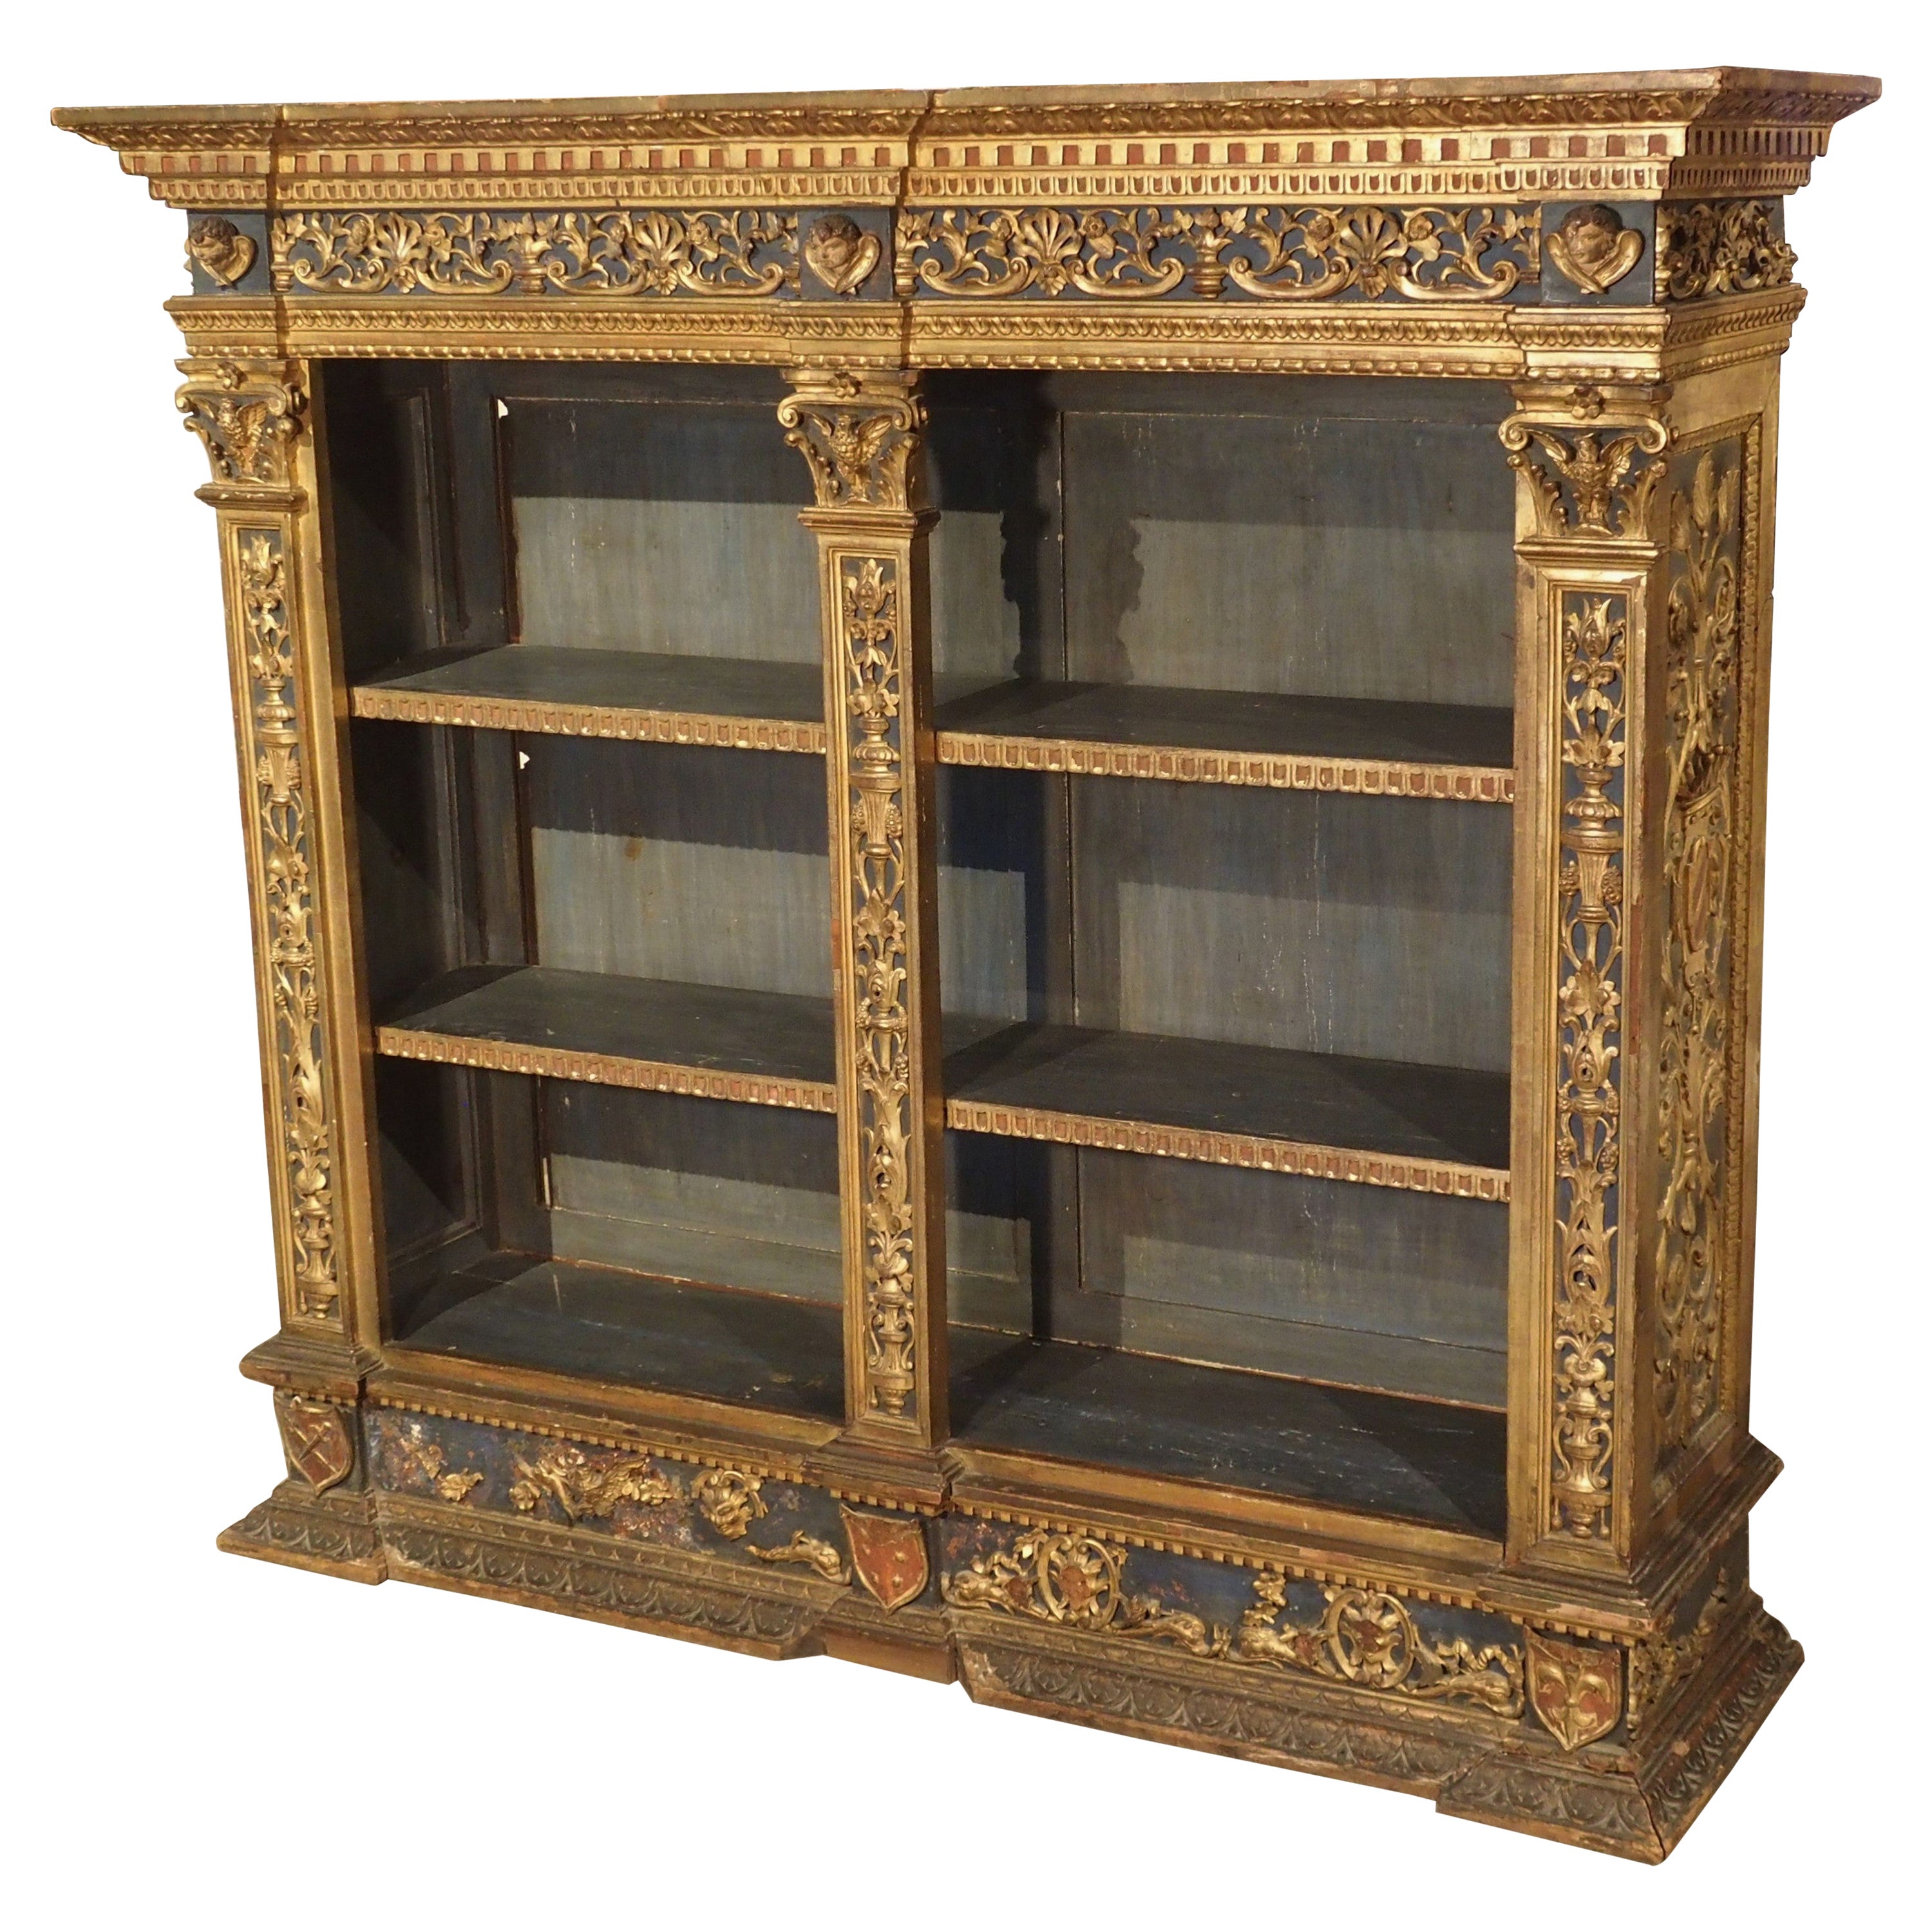 Antique Polychrome and Giltwood Florentine Low Bookcase, 19th Century